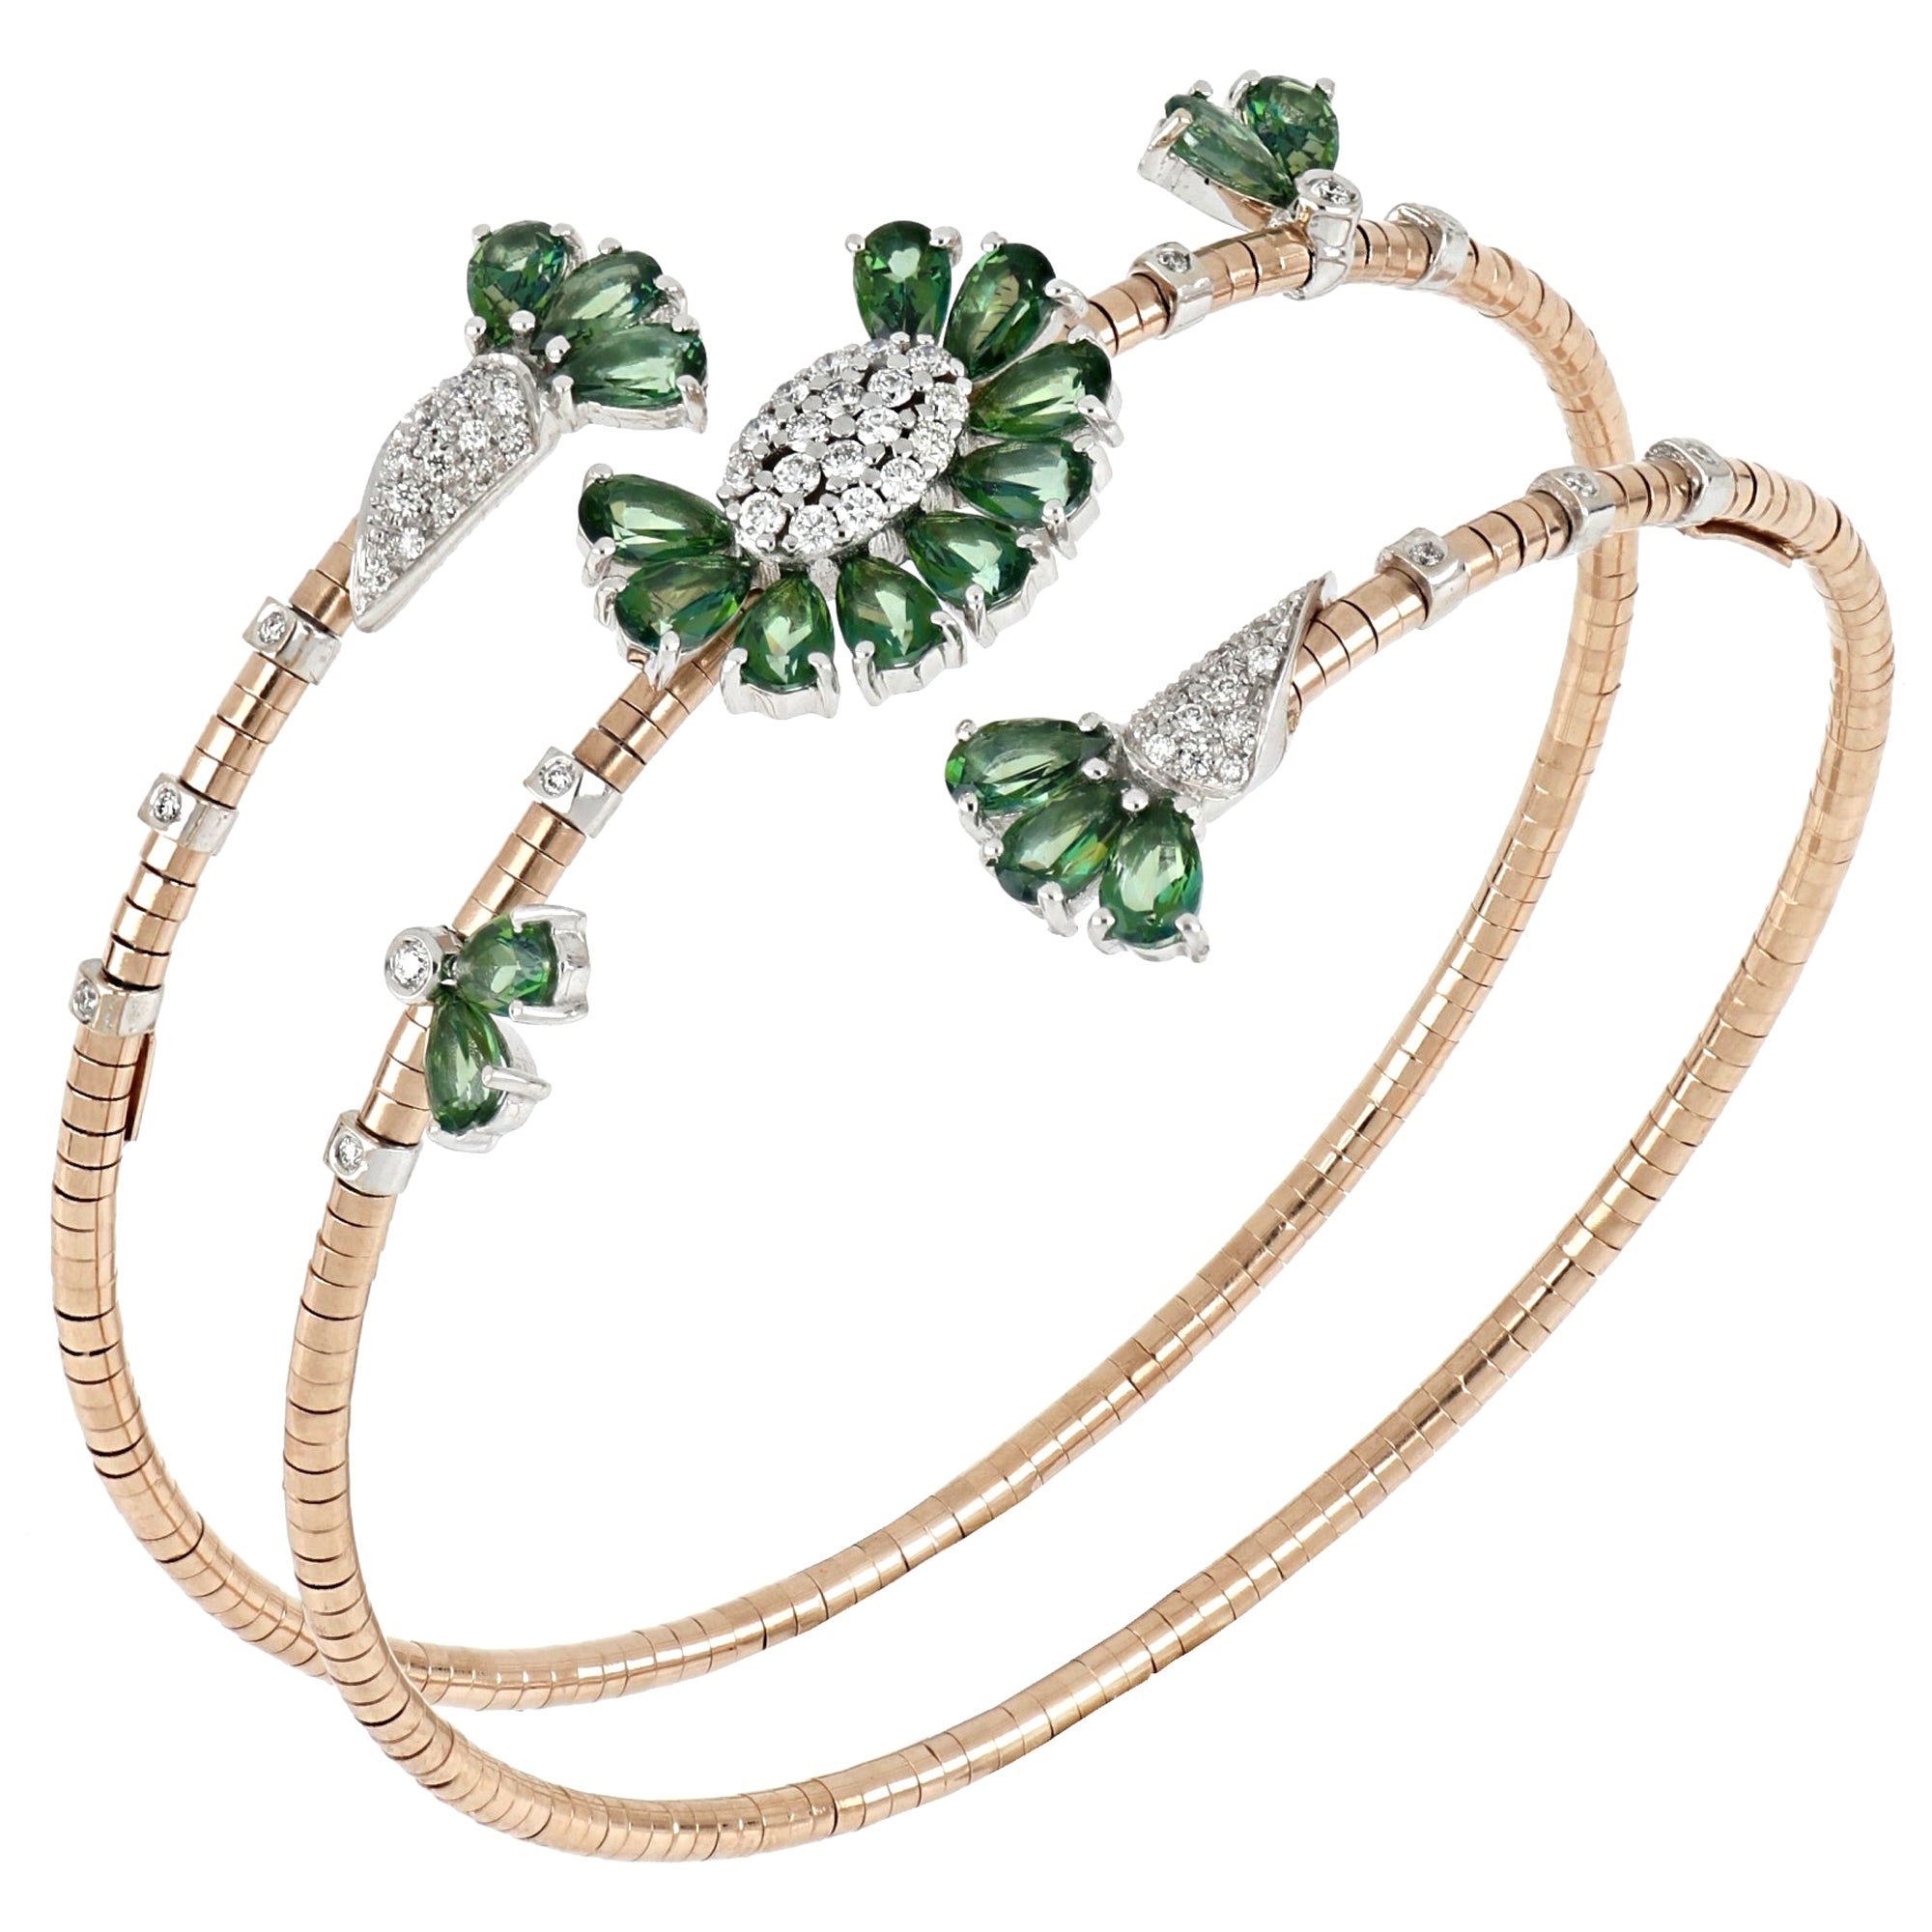 18kt Rose and White Gold Flex Bracelet Flowers with Green Topazes and Diamonds